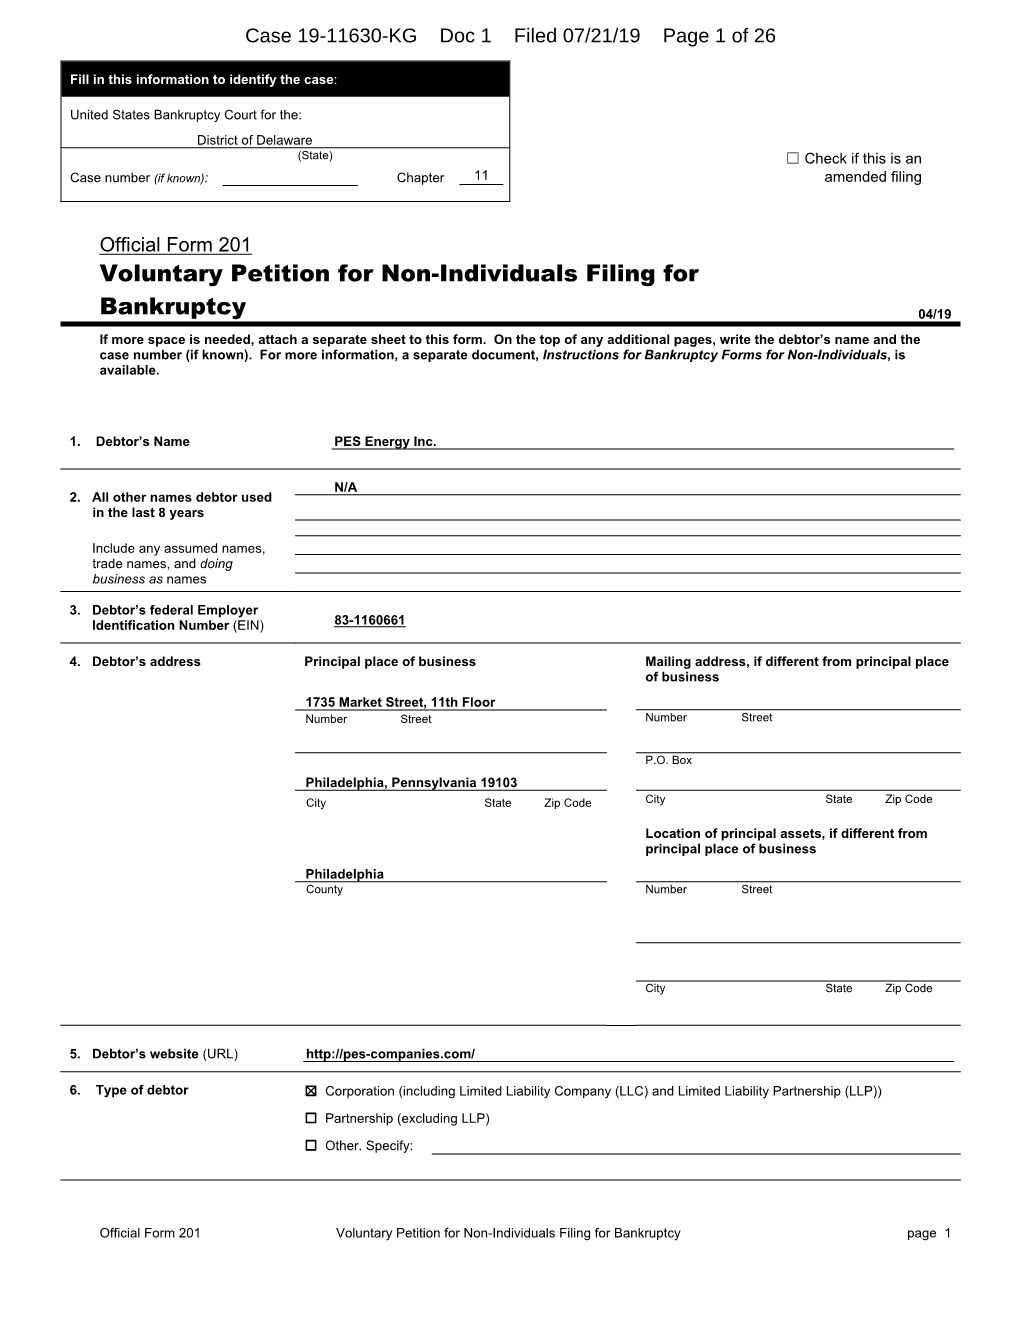 Voluntary Petition for Non-Individuals Filing for Bankruptcy Page 1 Case 19-11630-KG Doc 1 Filed 07/21/19 Page 2 of 26